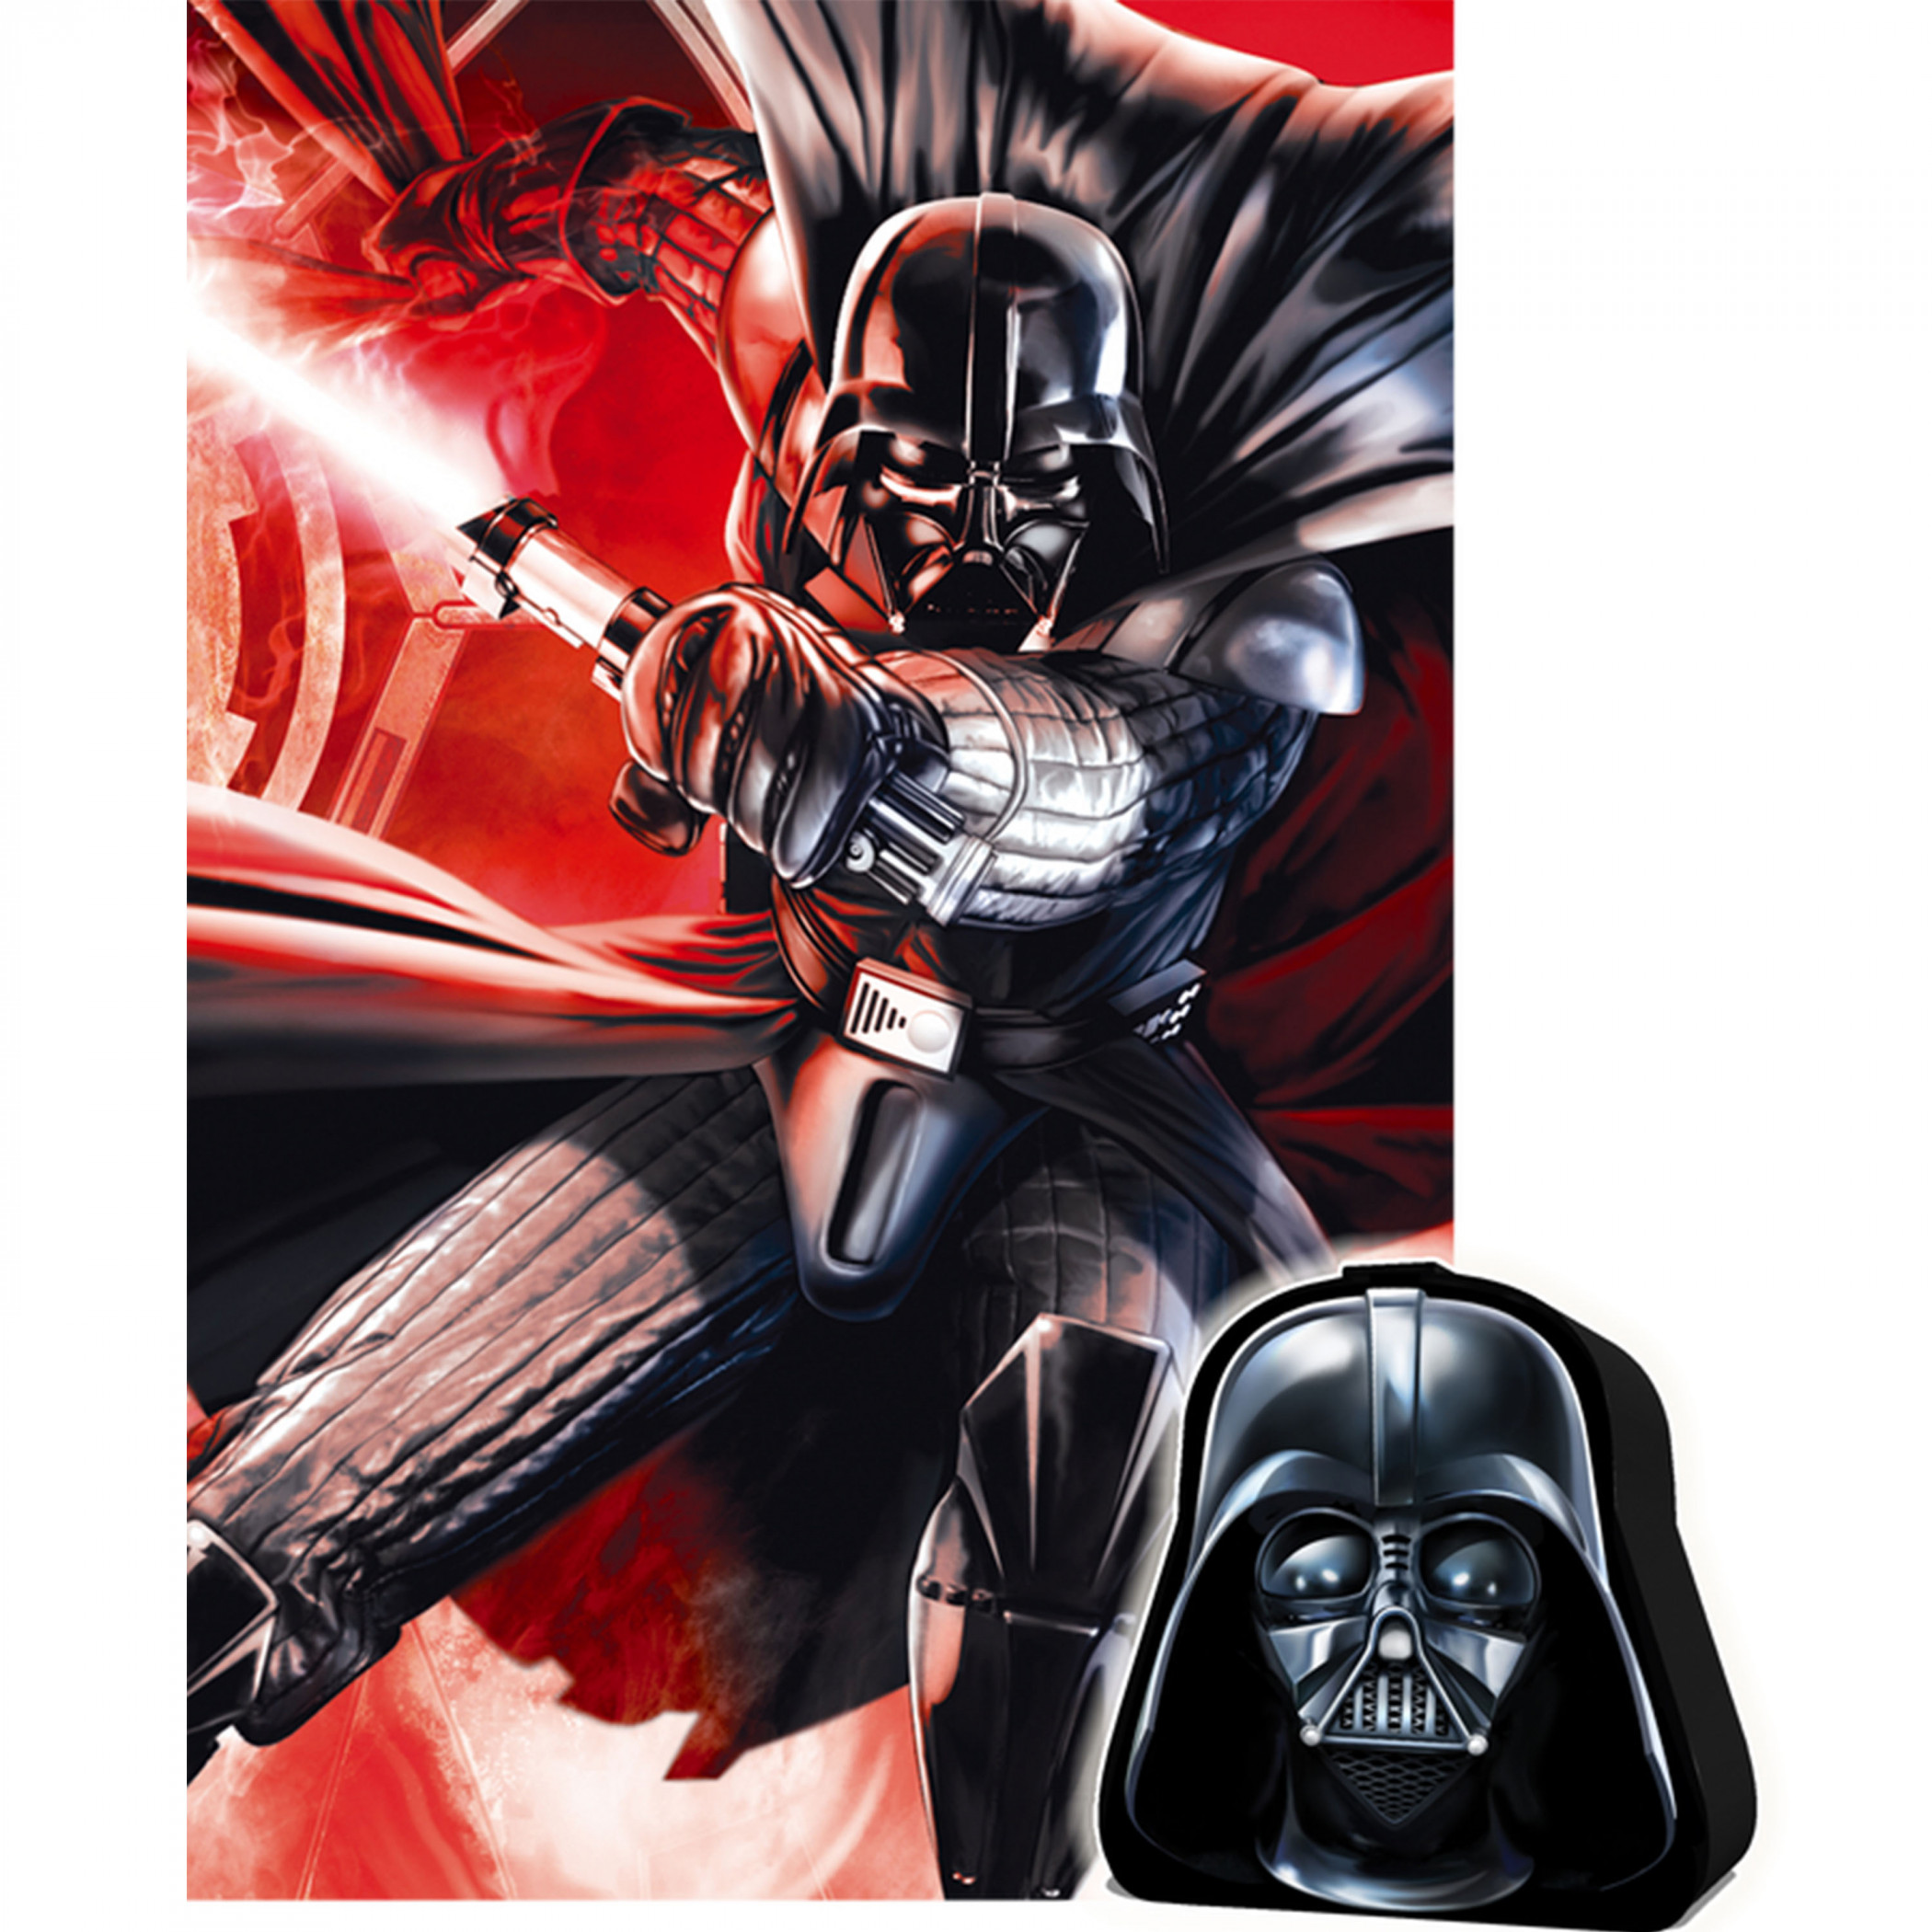 Star Wars Darth Vader Strikes 3D Lenticular 300pc Jigsaw Puzzle in Collectors Tin